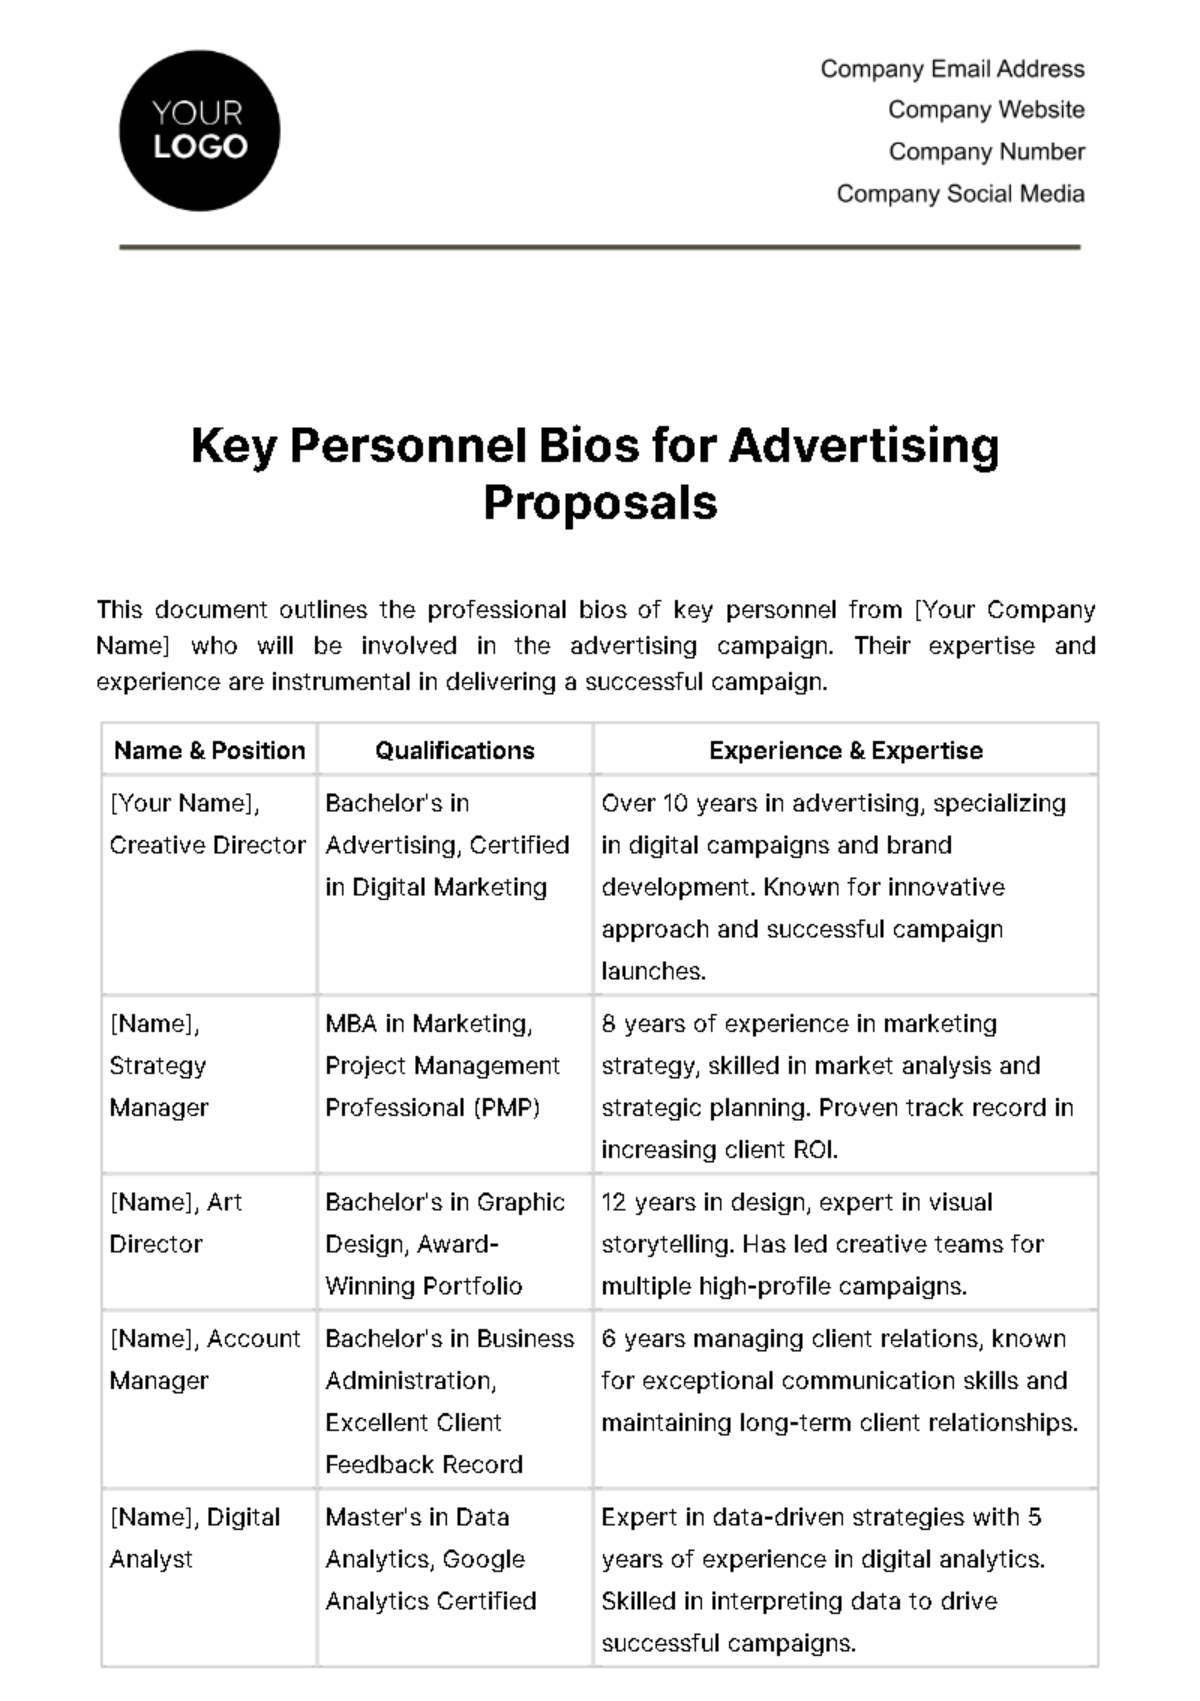 Free Key Personnel Bios for Advertising Proposals Template